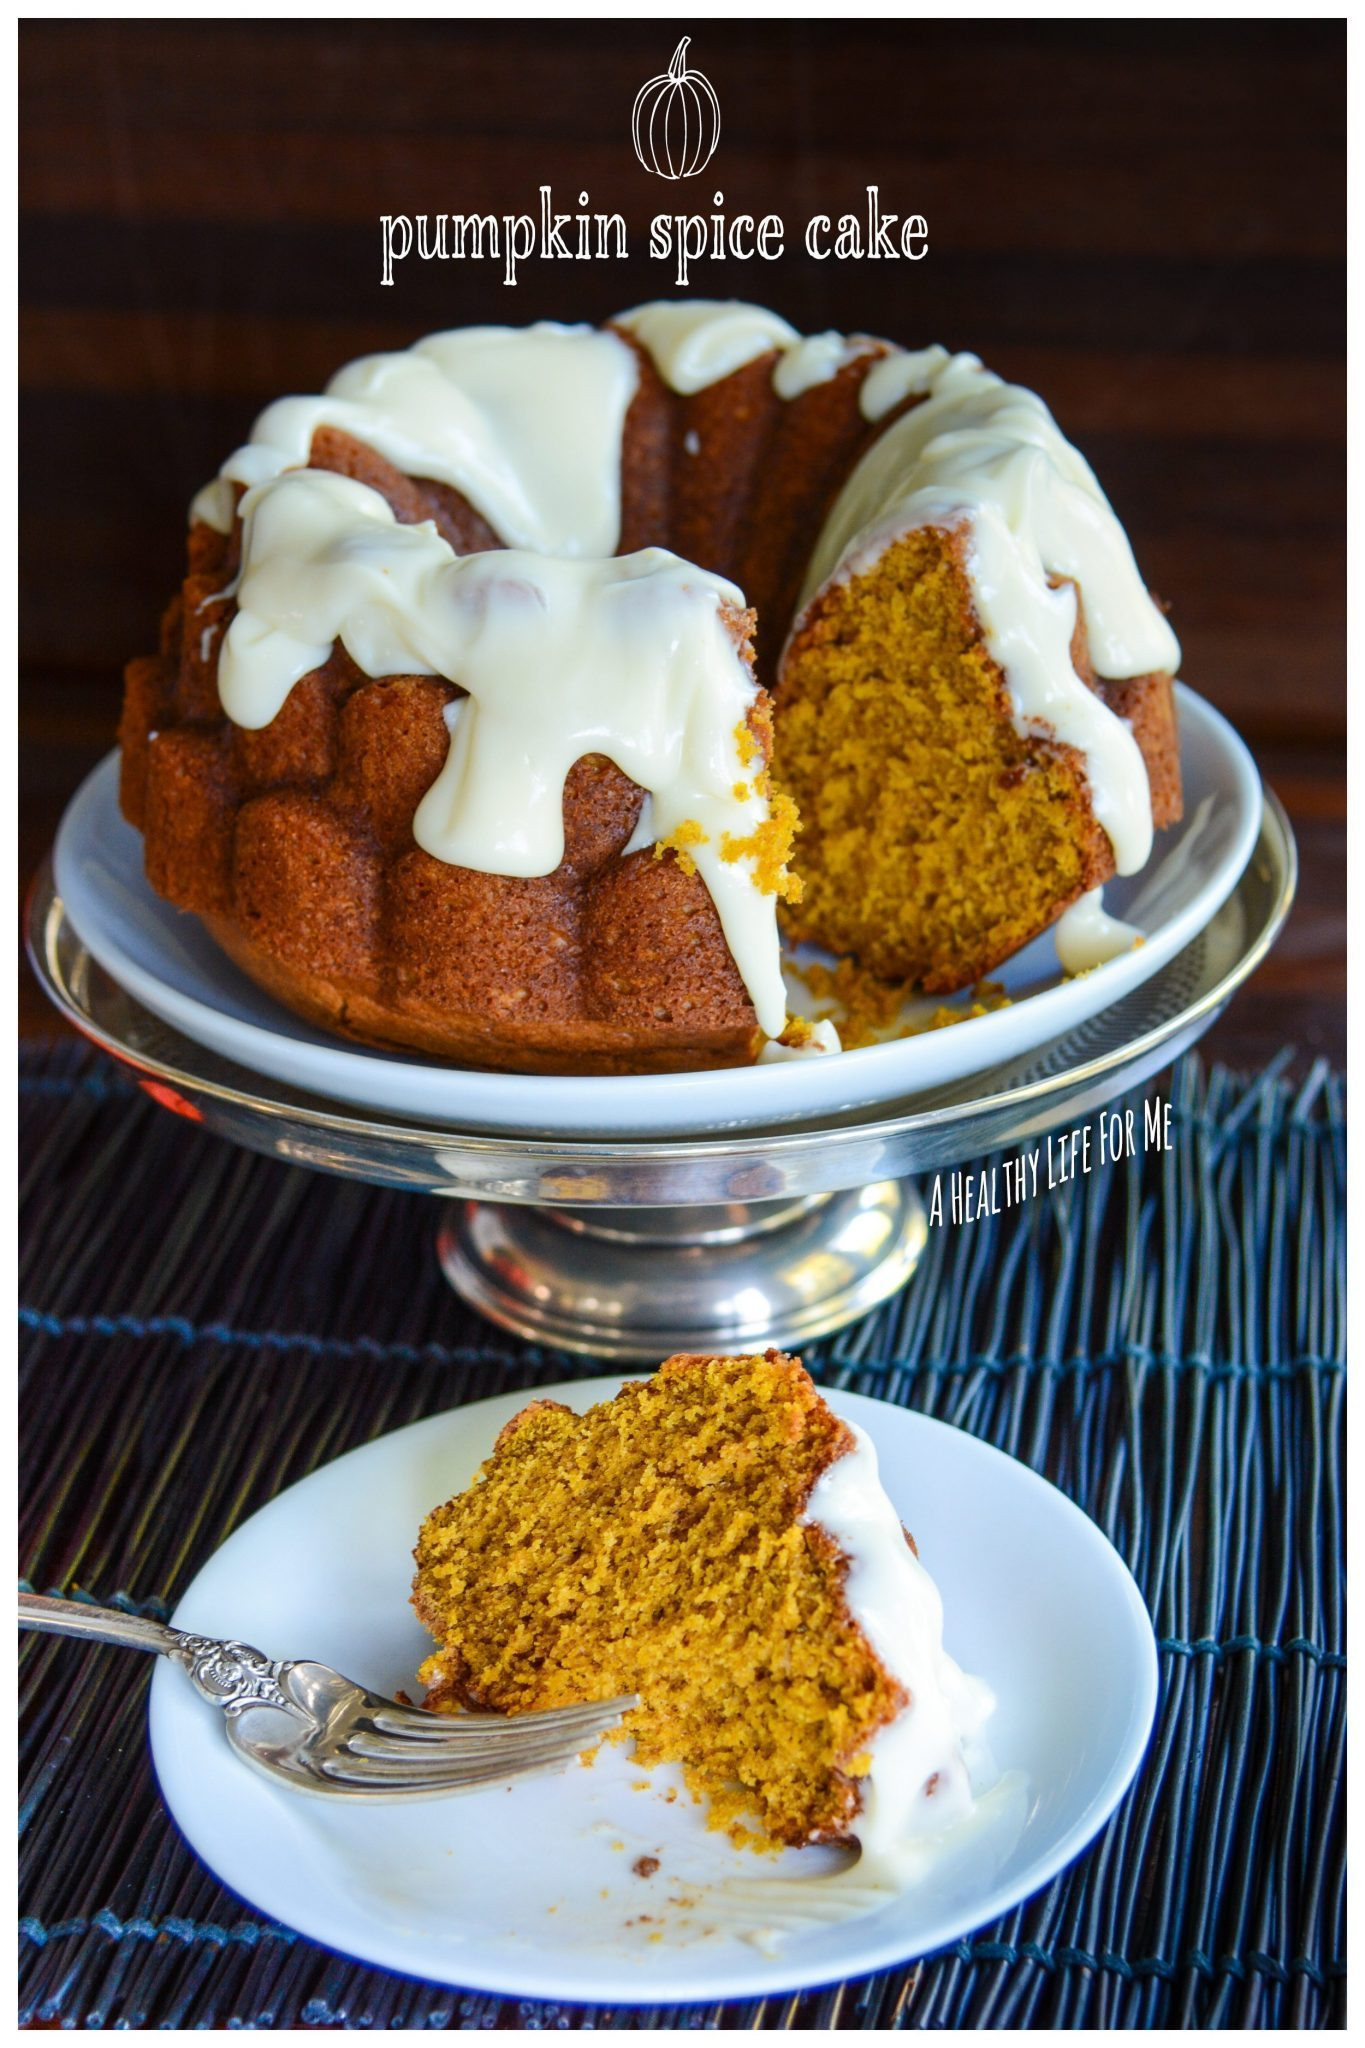 Pumpkin Spice Bundt Cake
 Pumpkin Spice Bundt Cake A Healthy Life For Me